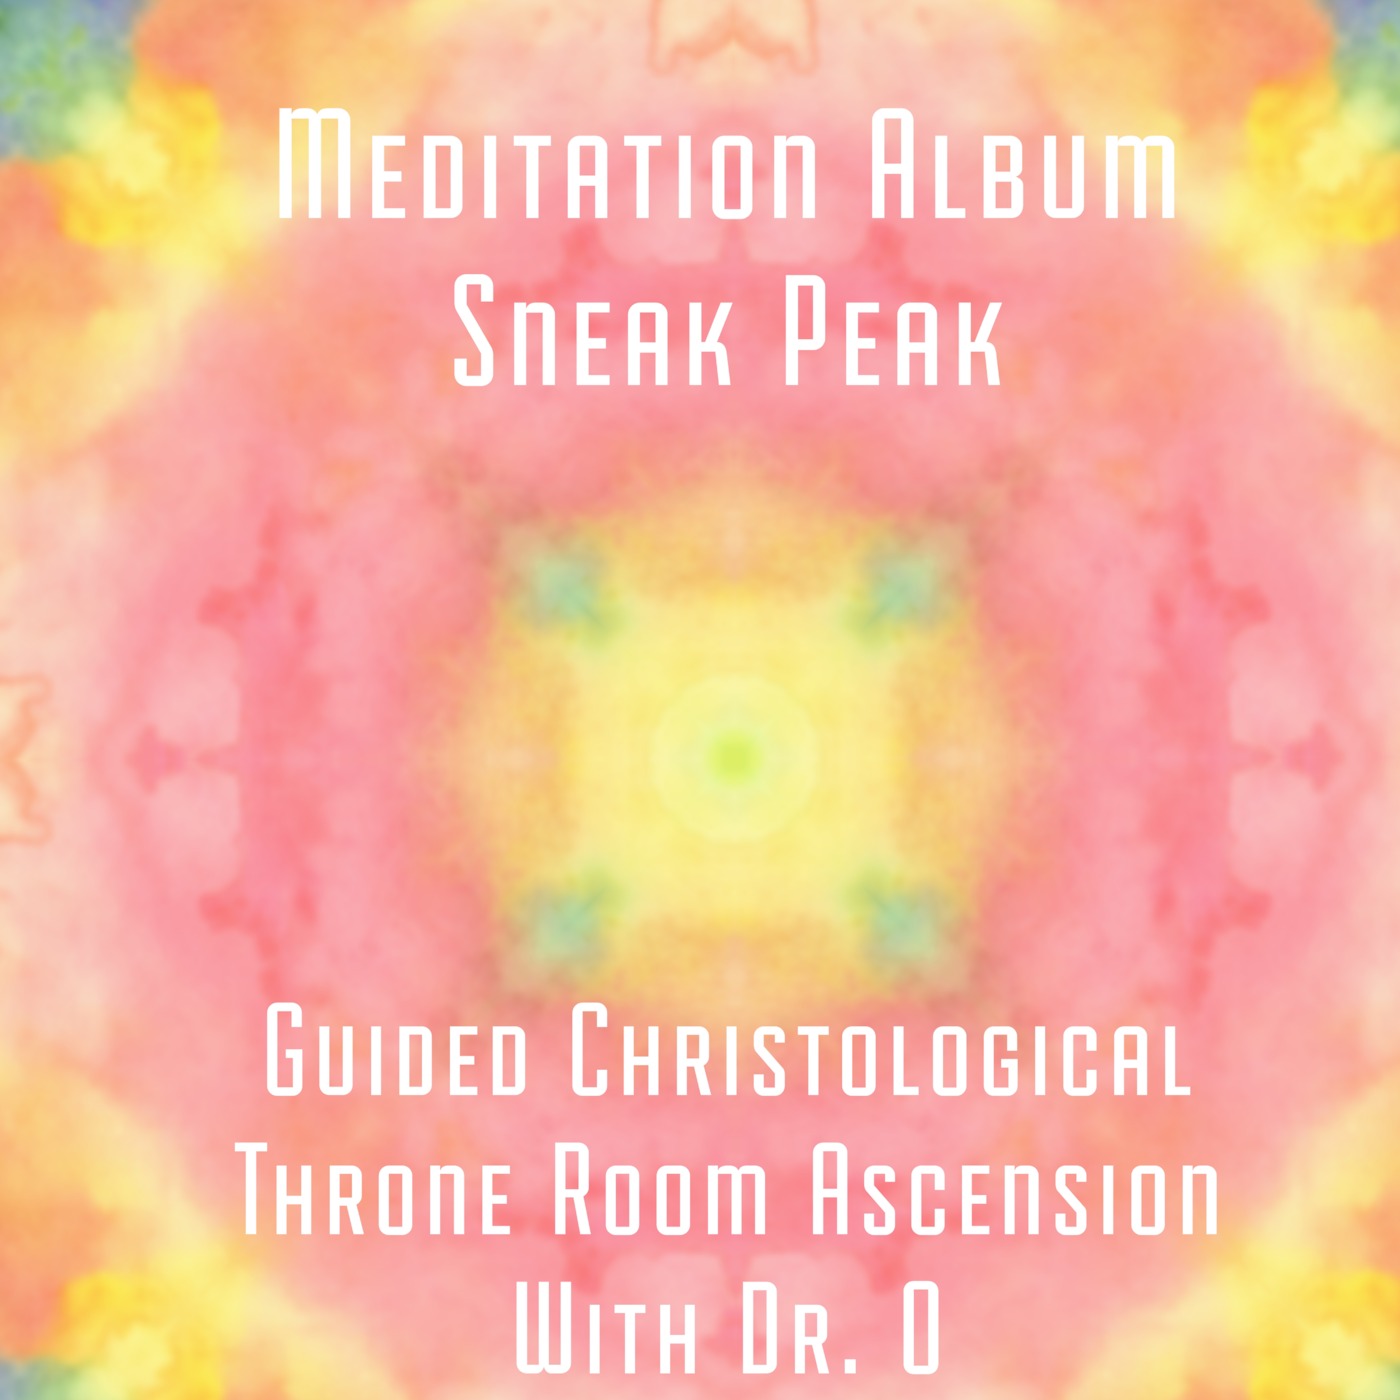 Throne Room Ascension - Guided Christological Meditation Album Sneak Peak with Dr. O